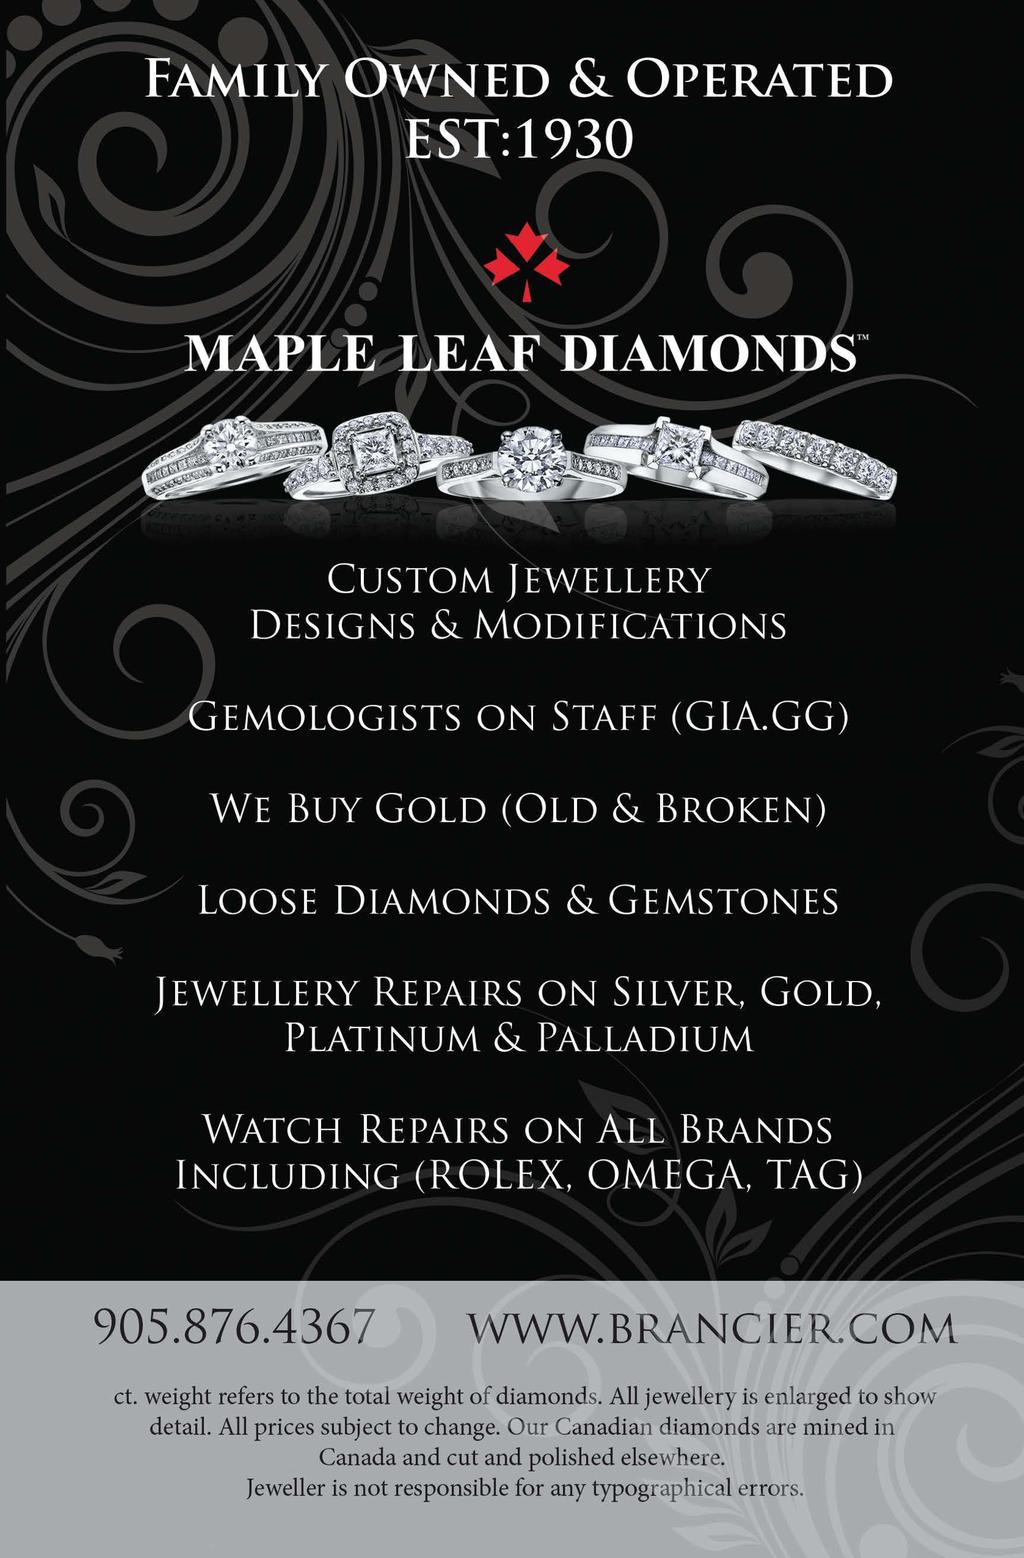 ILY OWNED & OPERATED EST:1930 ' MAPLE LEAF DIAMONDS"' CUSTOM JEWELLERY DESIGNS & MODIFICATIONS GEMOLOGISTS ON STAFF (GIA.